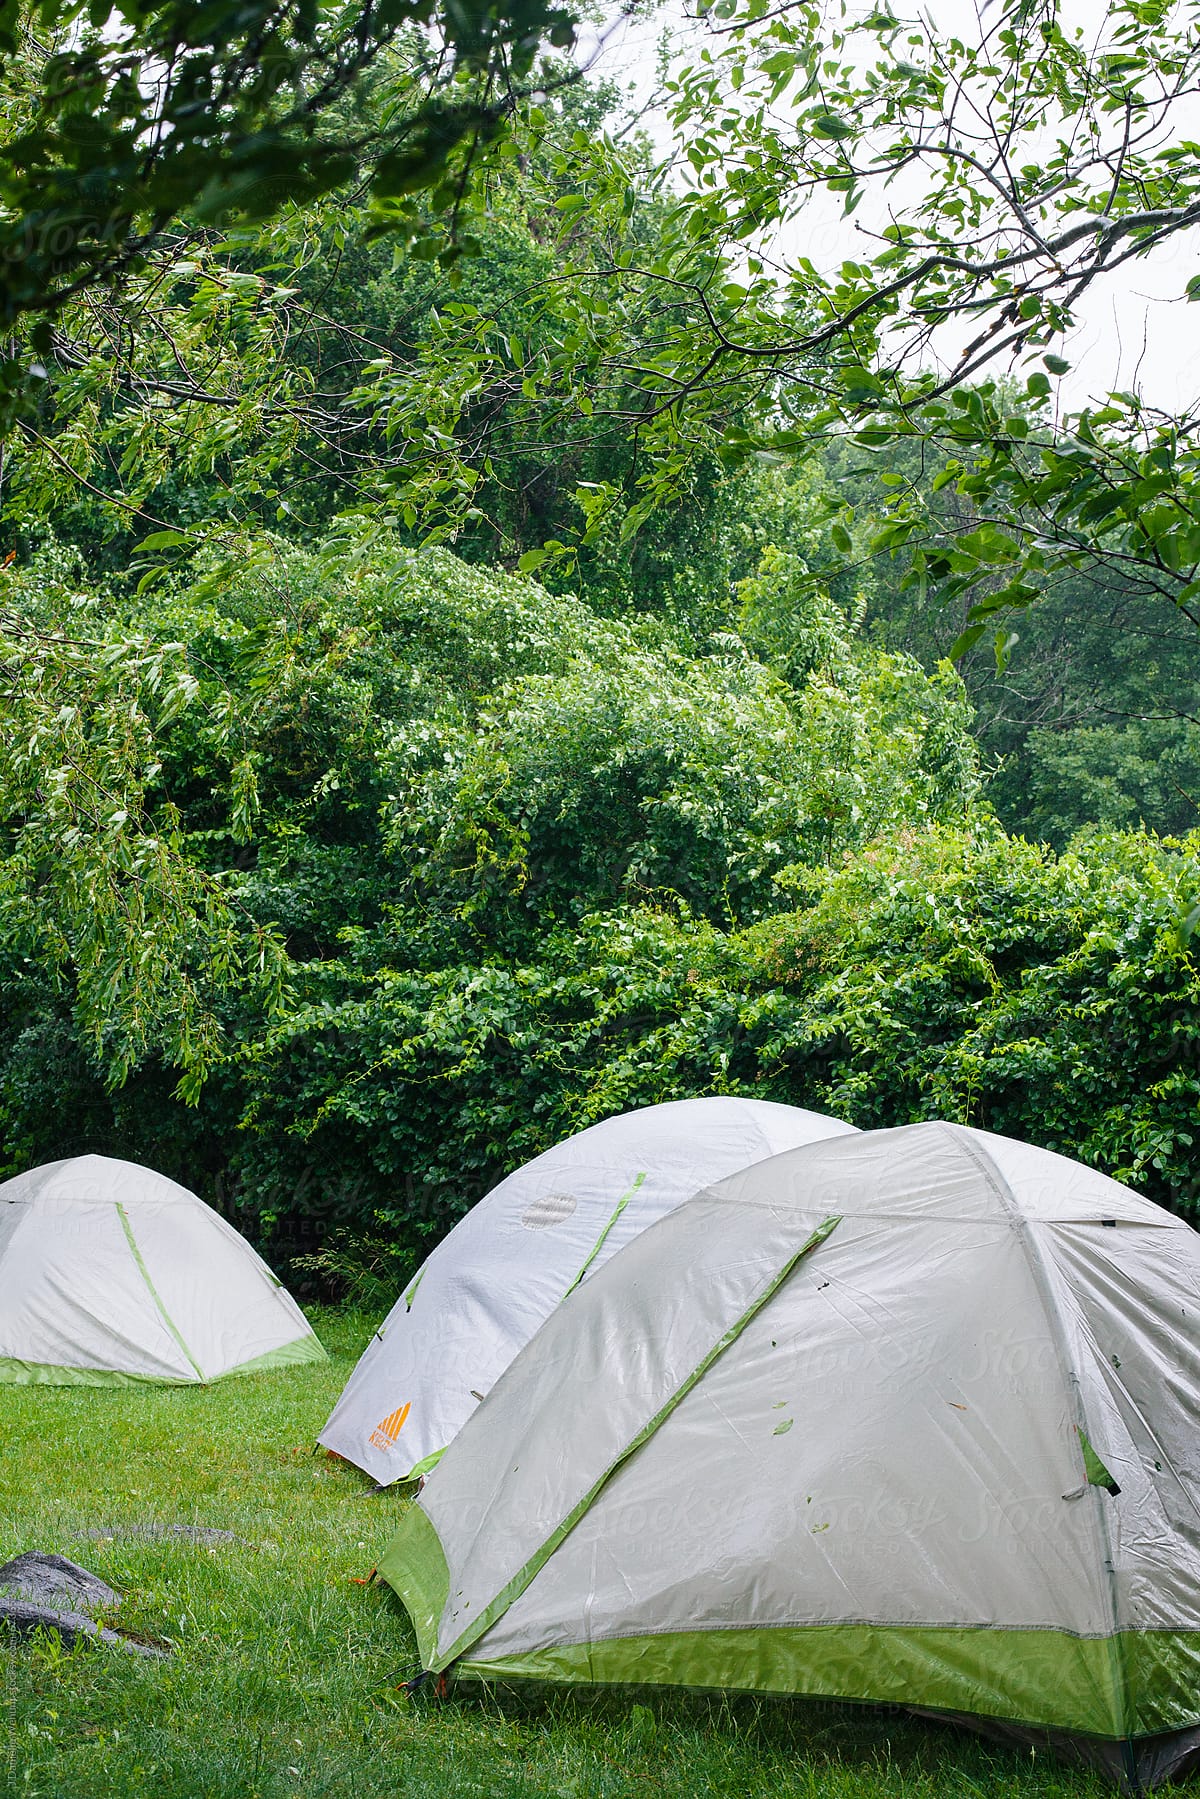 Tents in the rain at a camping ground.